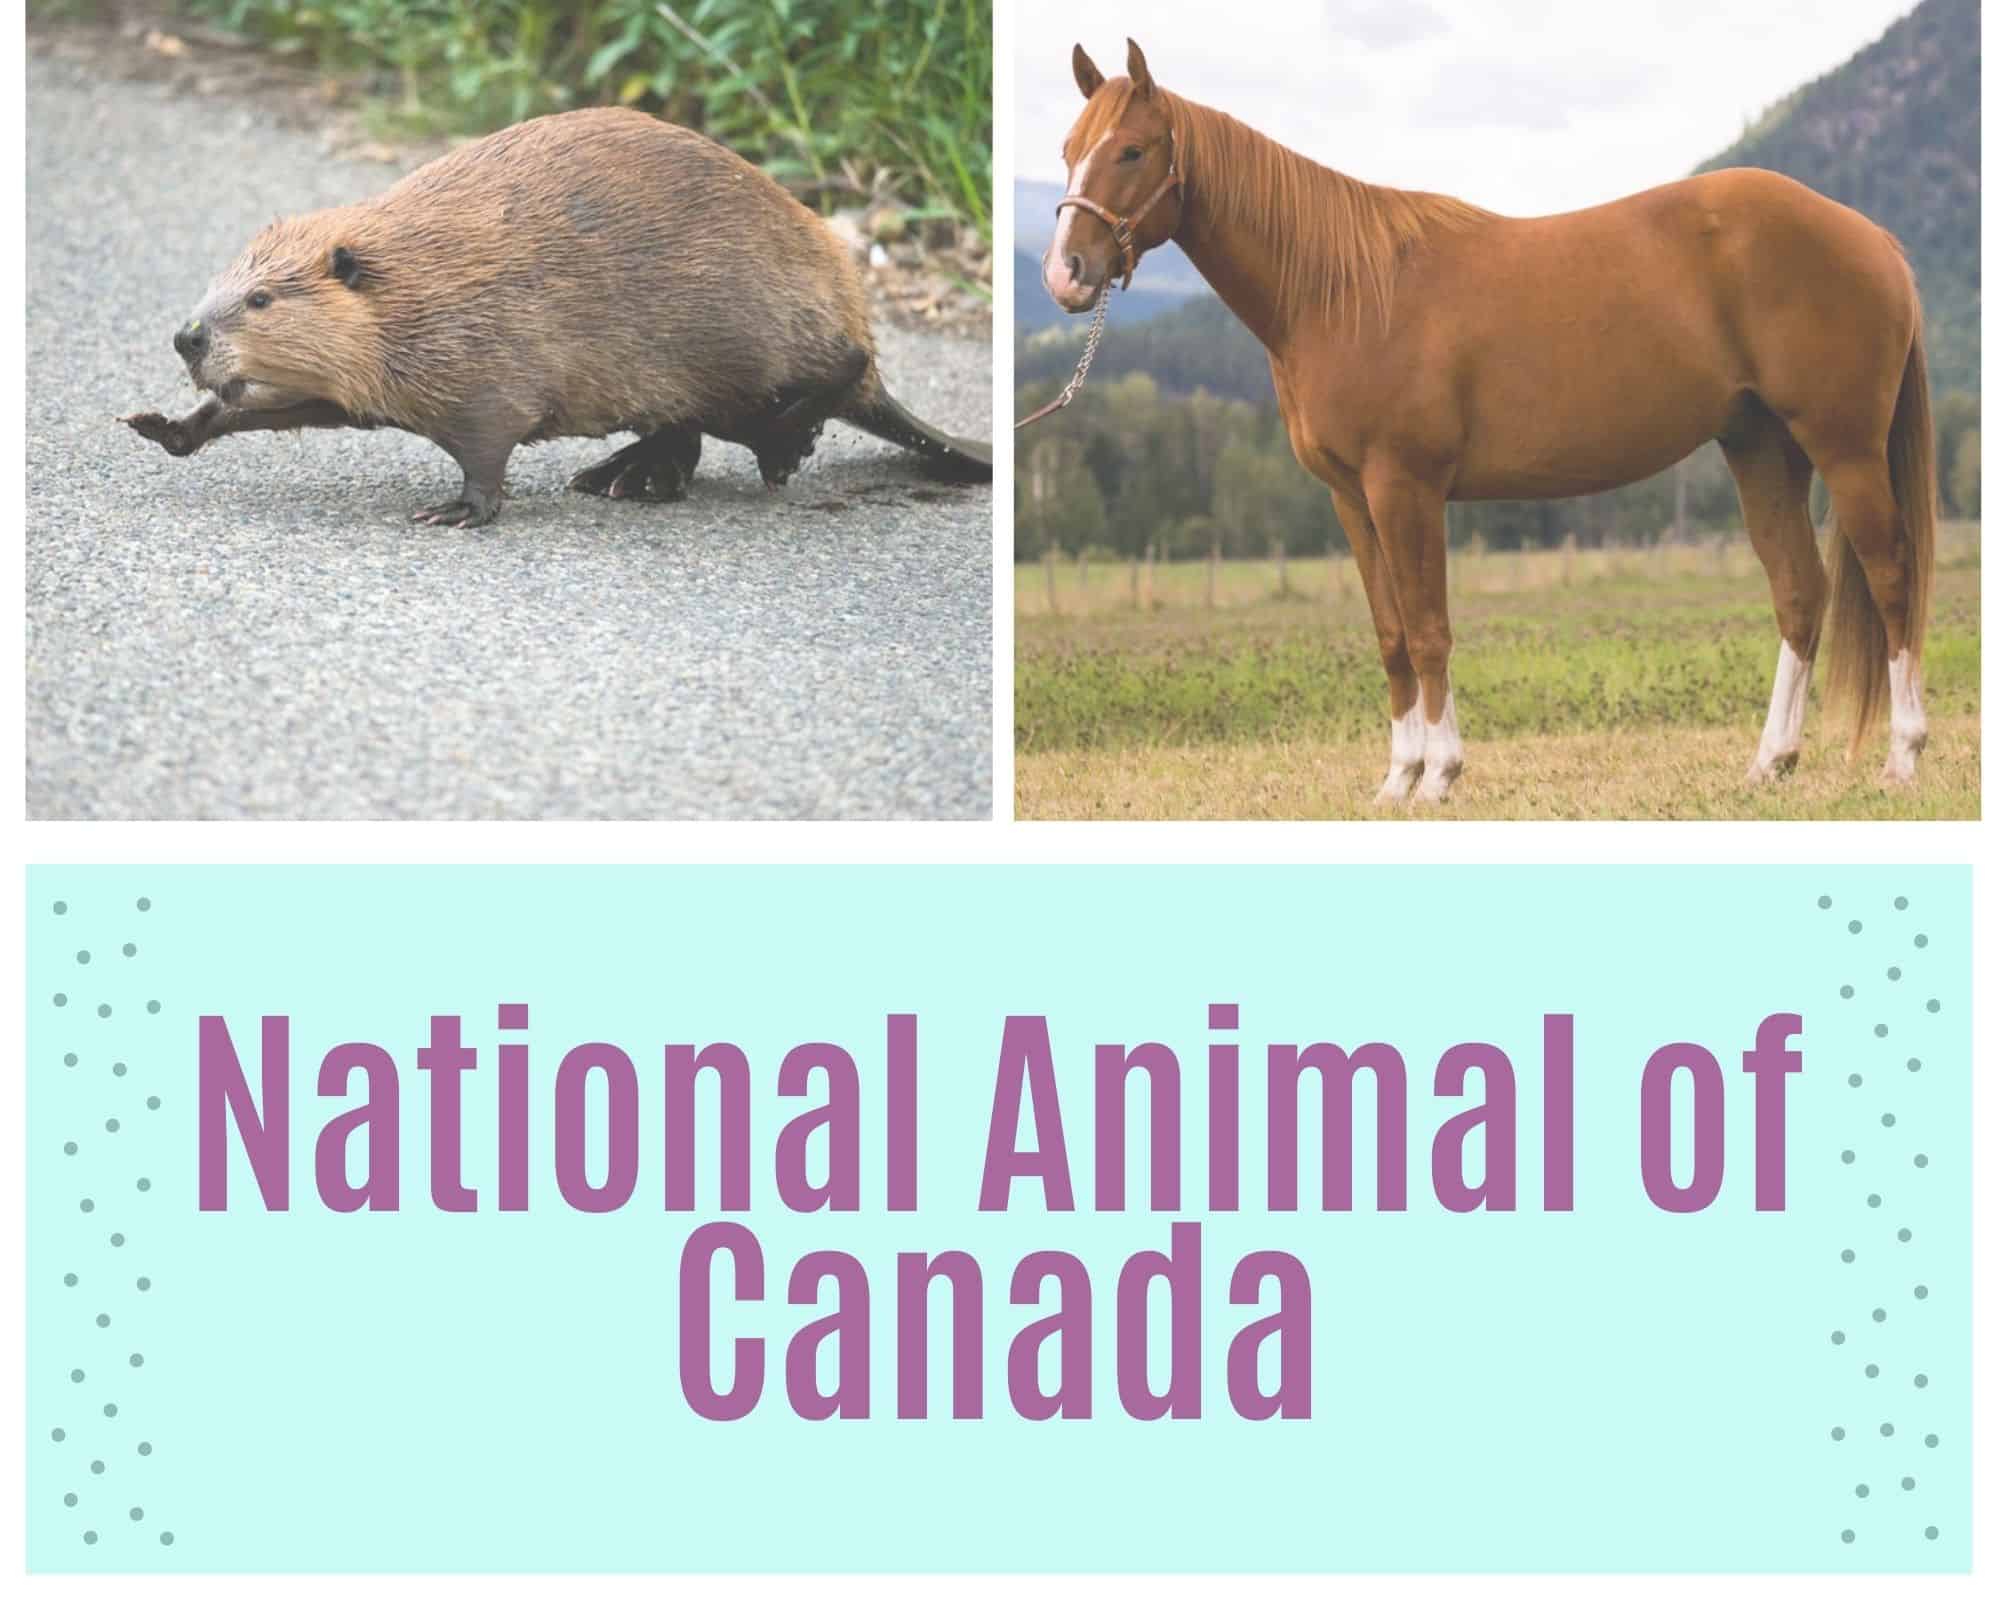 What Is The National Animal of Canada? | WhatsAnswer